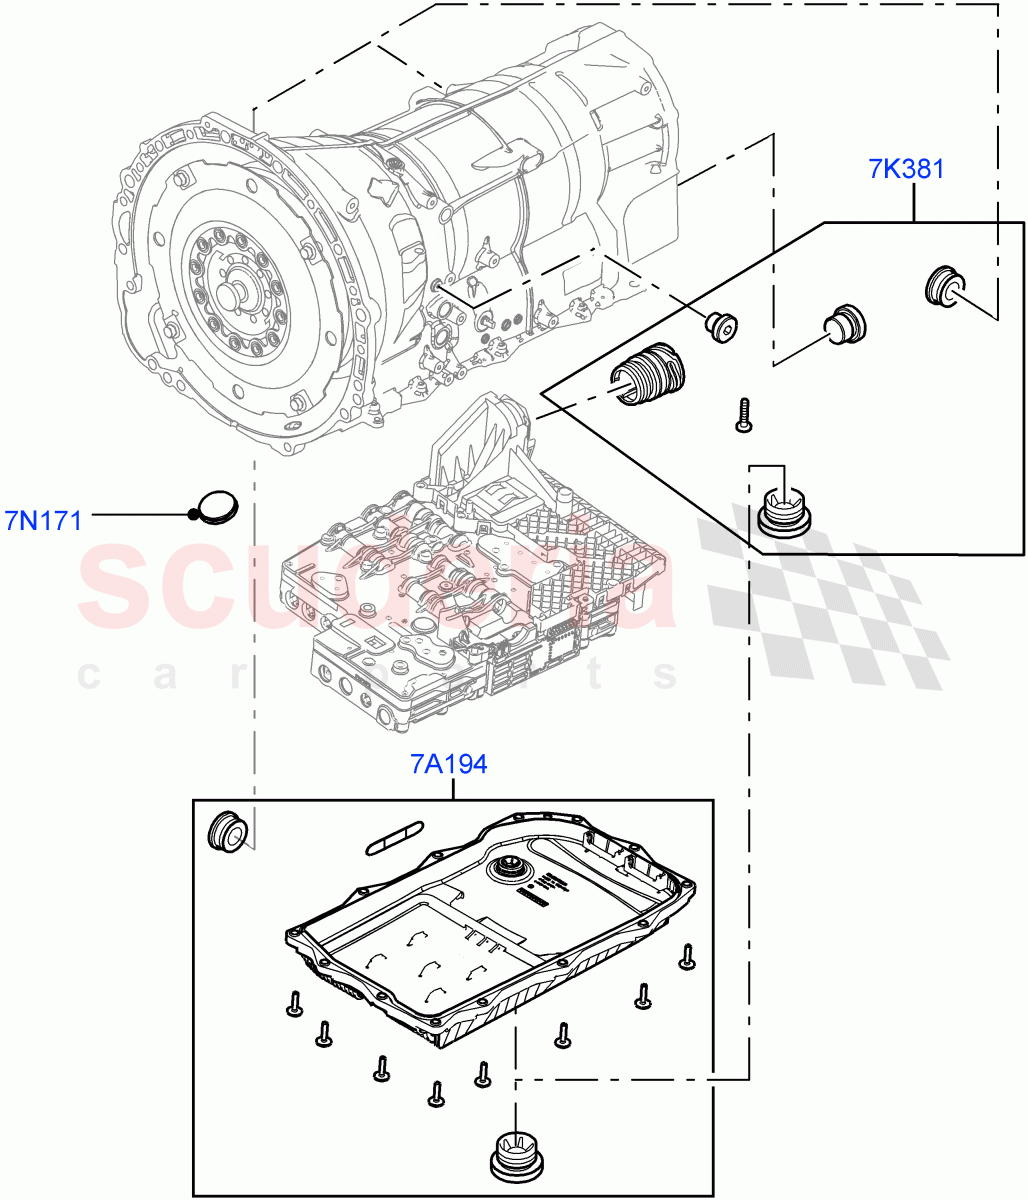 Transmission External Components(3.0 V6 Diesel,8 Speed Auto Trans ZF 8HP70 4WD)((V)FROMCA000001) of Land Rover Land Rover Discovery 4 (2010-2016) [2.7 Diesel V6]